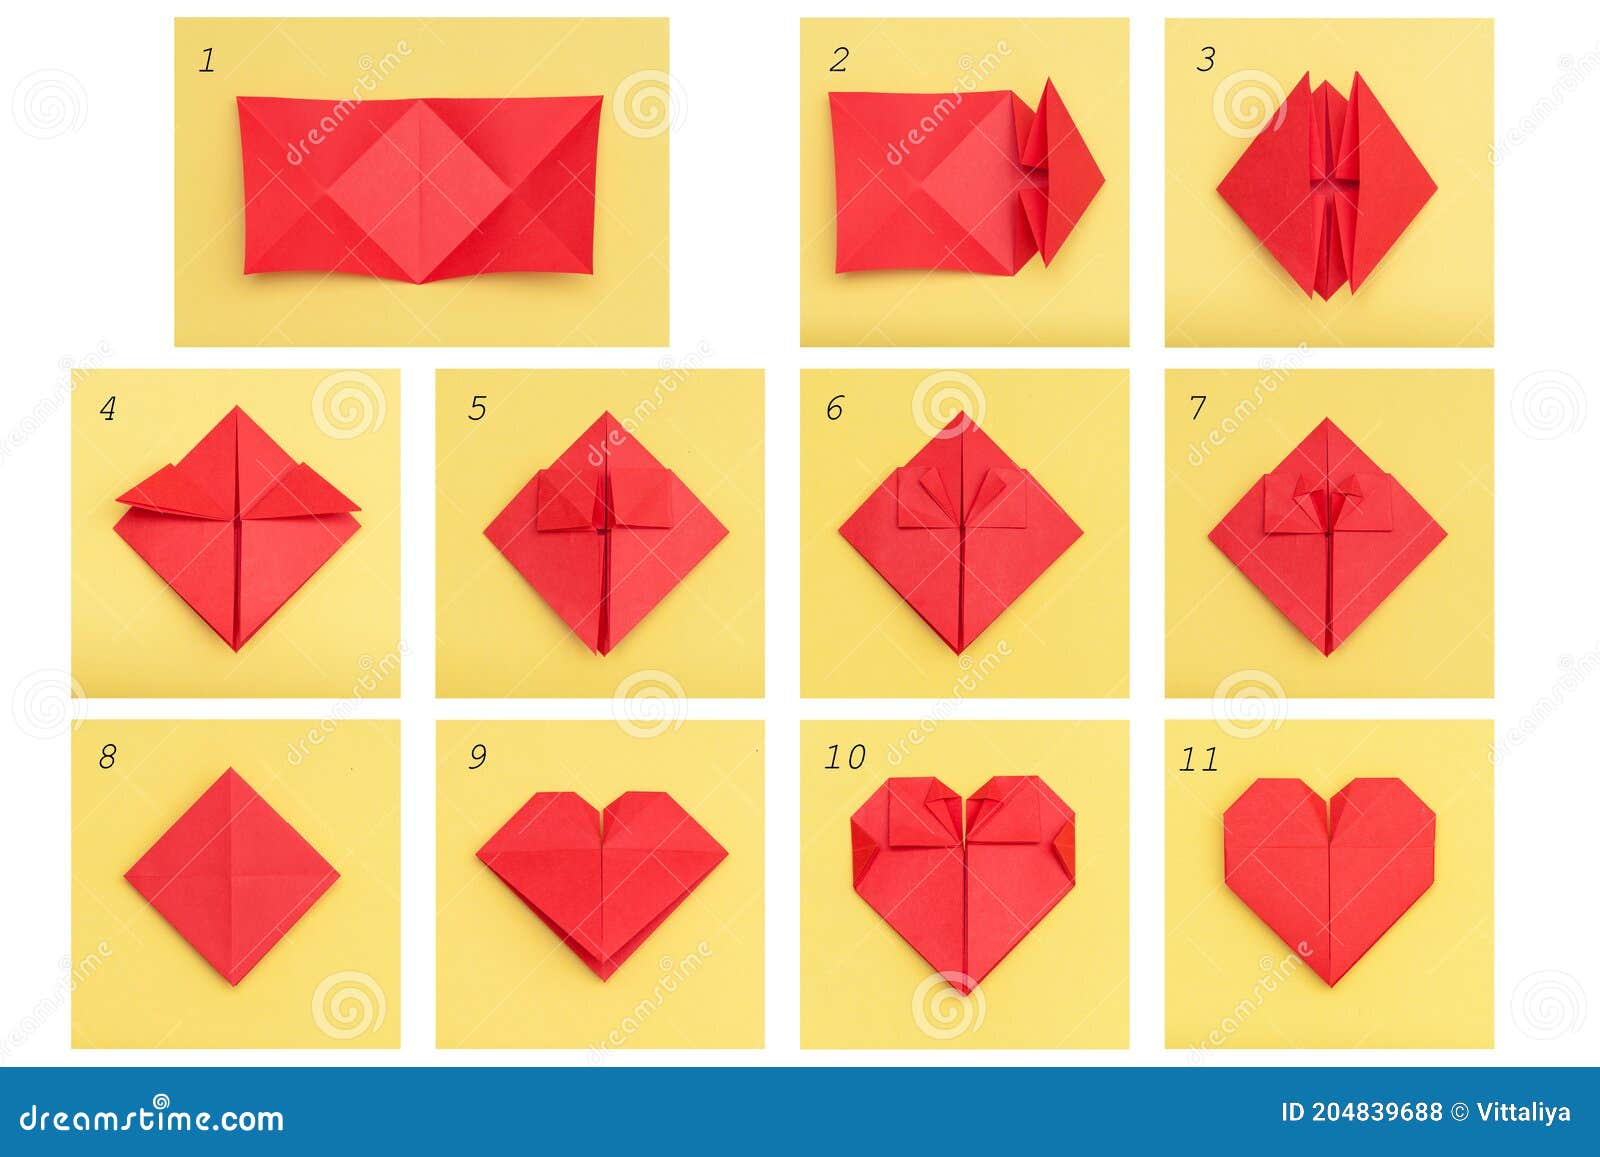 Step by Step Instruction How To Make Paper Heart. DIY Concept Stock Photo -  Image of origami, love: 204839688